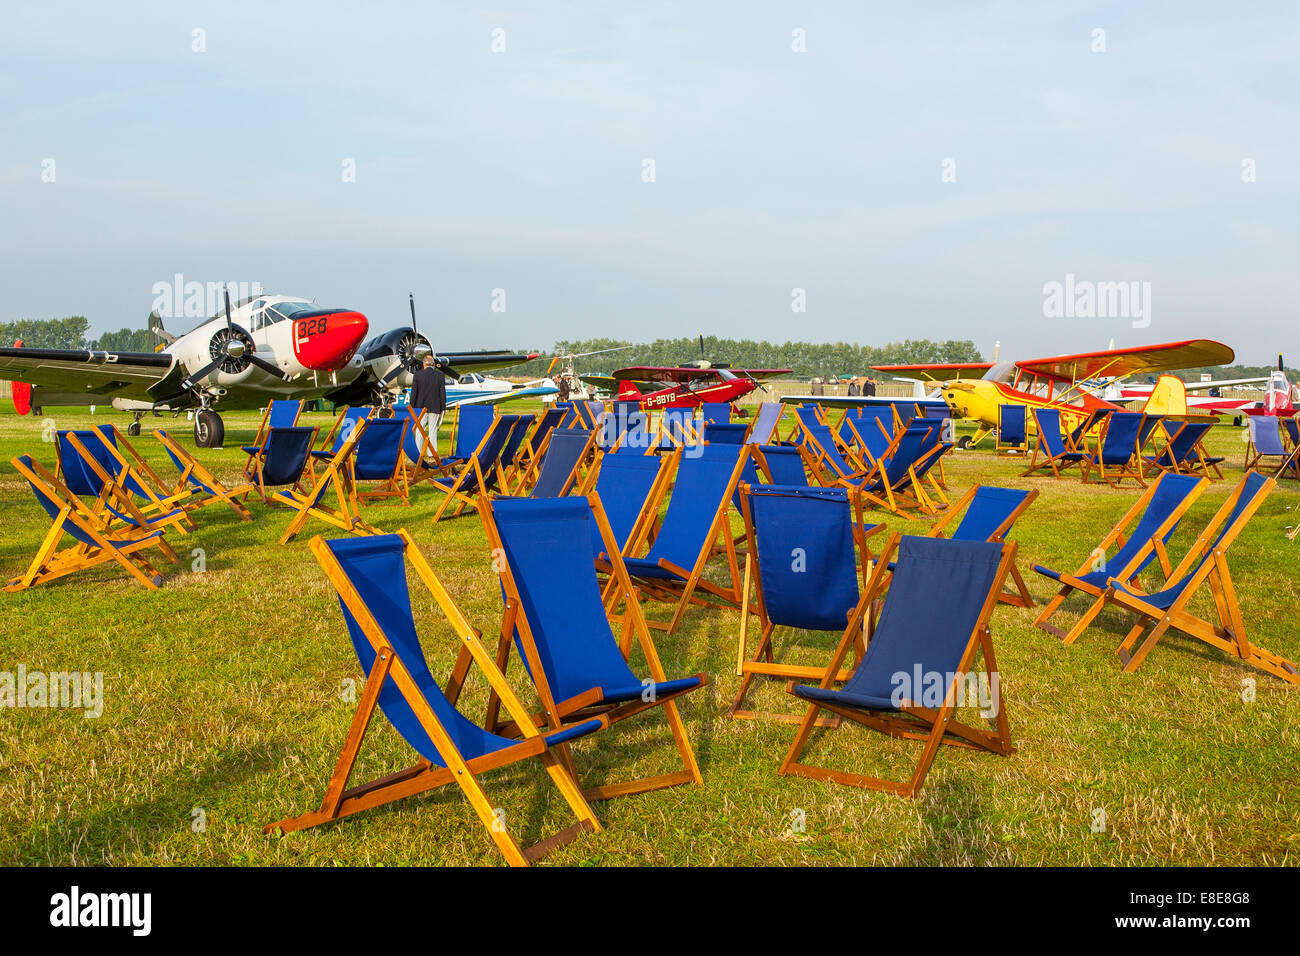 Blue deck chairs spread out at the Goodwood Revival 2014 airfield, West Sussex, UK Stock Photo